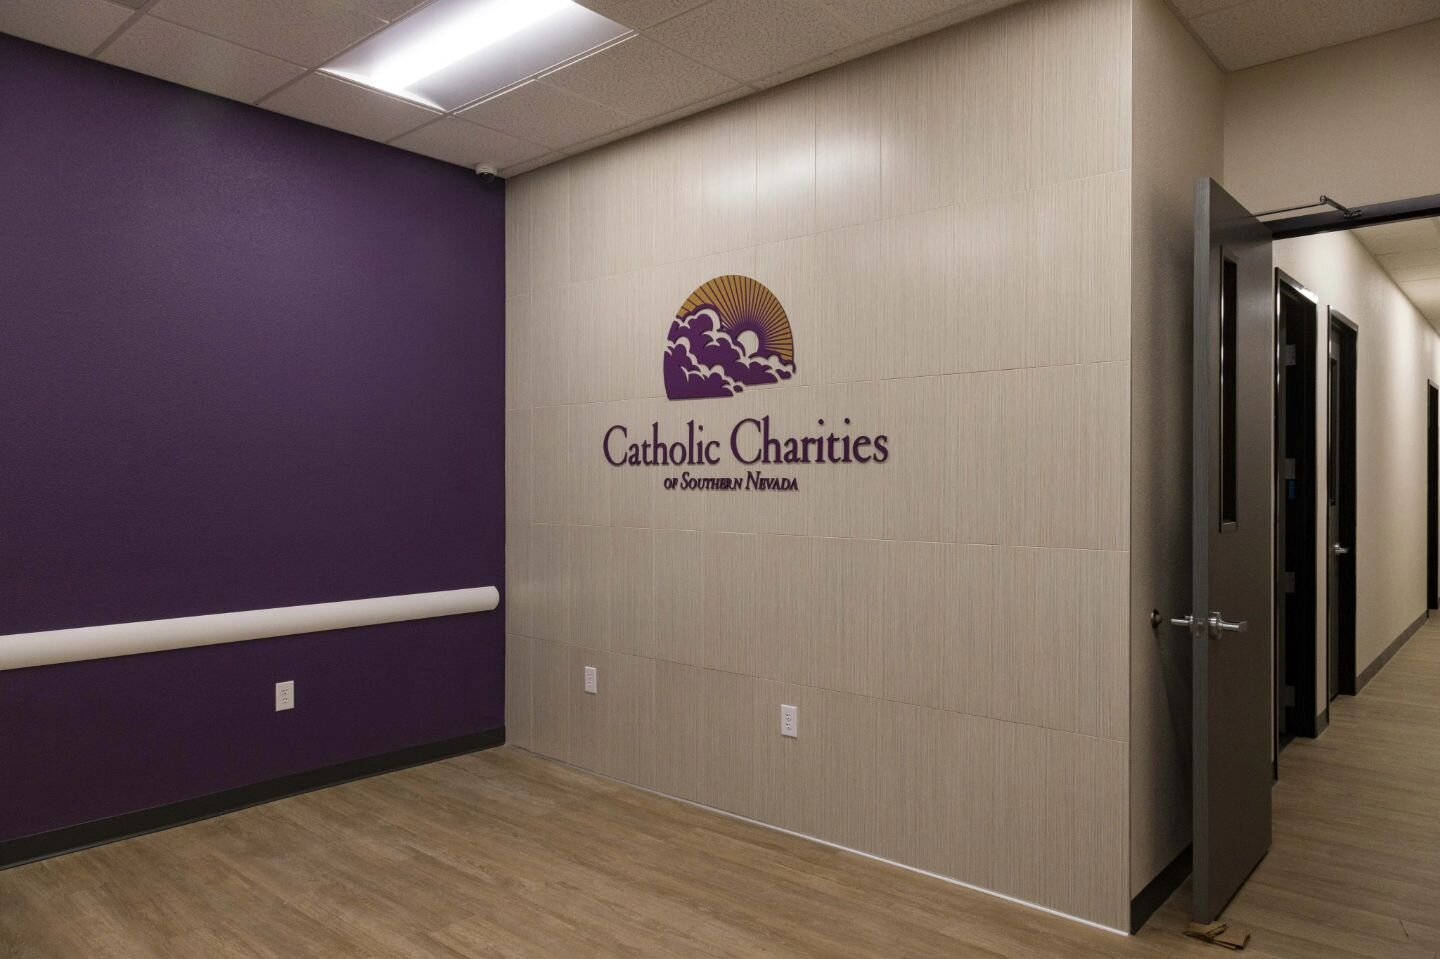 Final pictures for the office renovation at Catholic Charities of Southern Nevada. 

We have really enjoyed working with them and hope that this is just the first project of many
.
.
.
#architecturefirm #archdaily #archlovers #architecture #architect